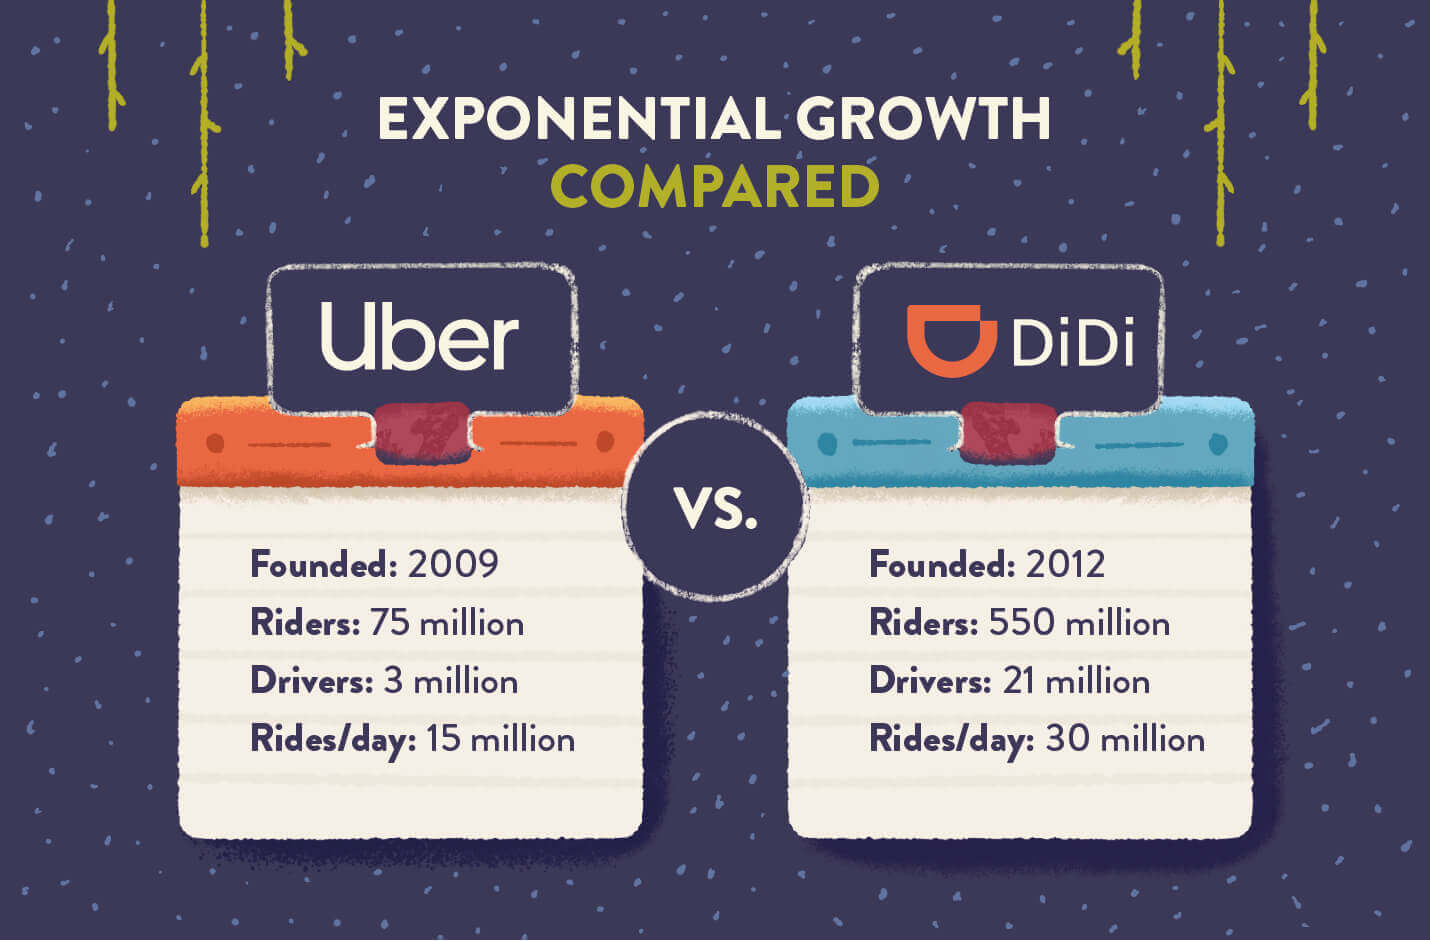 exponential growth comparison between China's DiDi and US Uber on how much these companies have grown